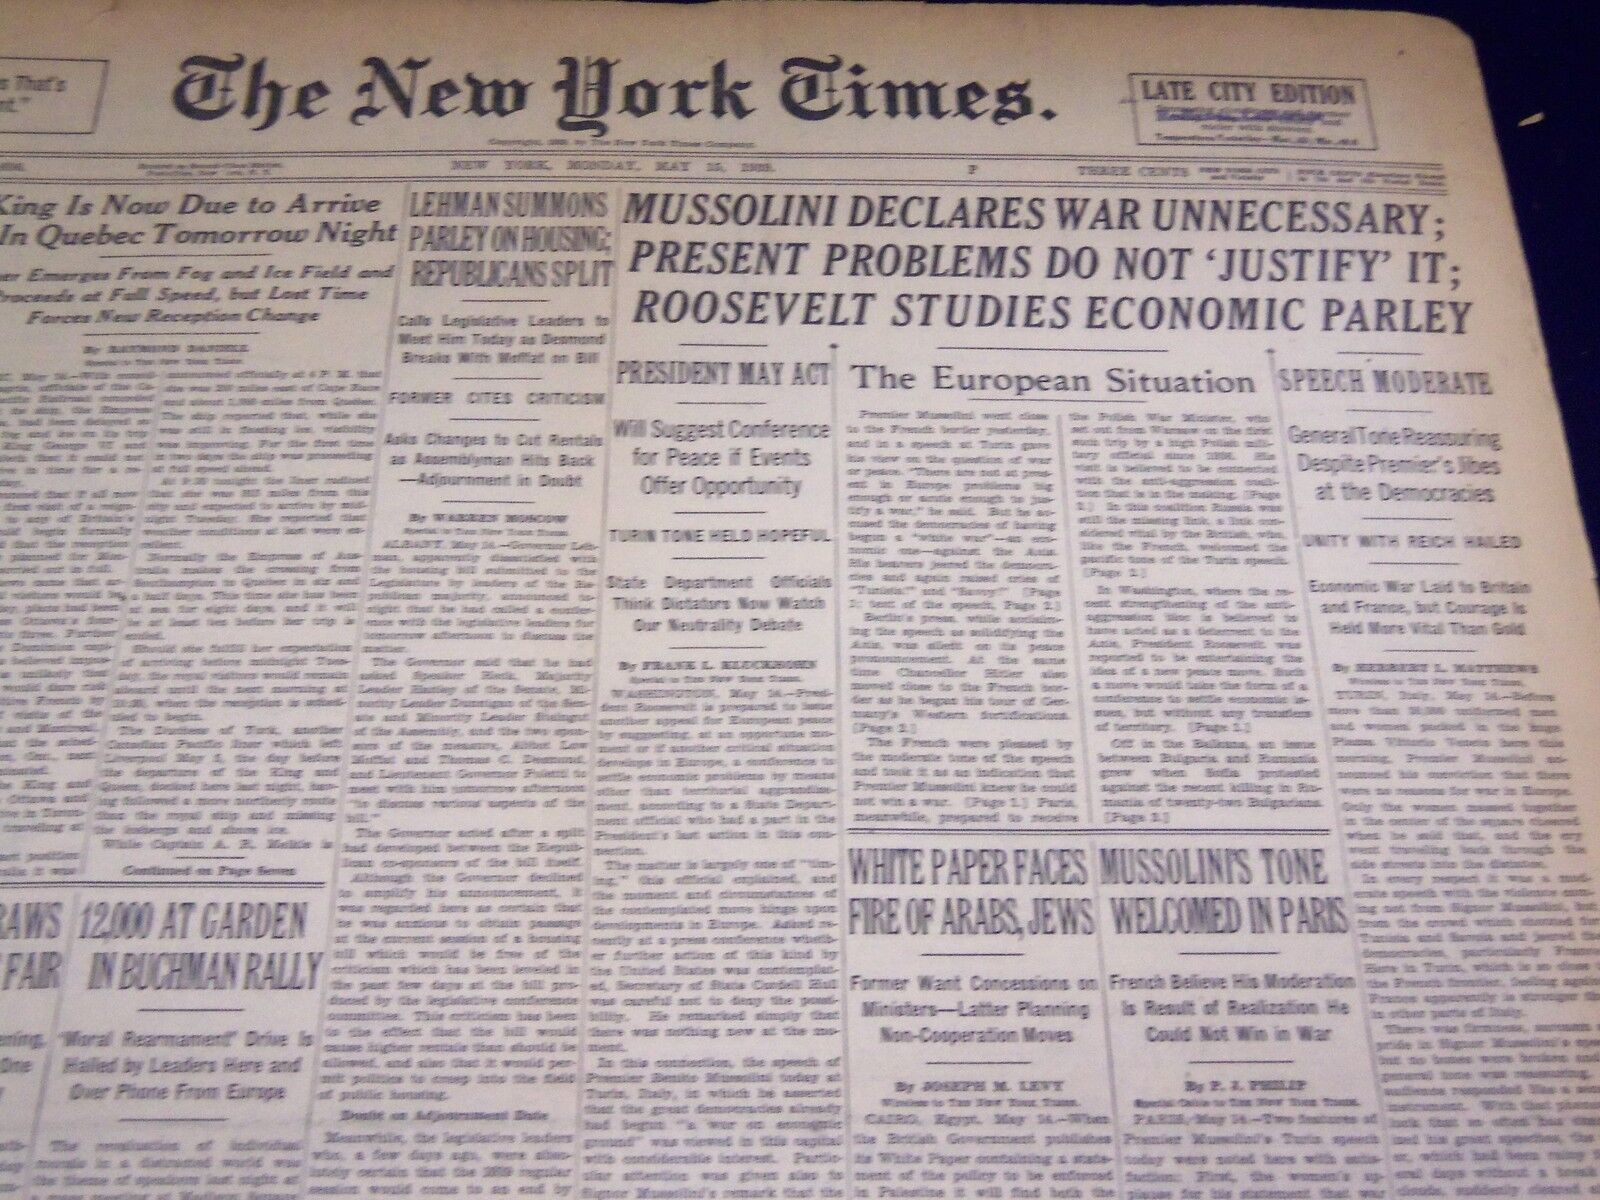 1939 MAY 15 NEW YORK TIMES - MUSSOLINI SAYS WAR UNNECESSARY - NT 3071